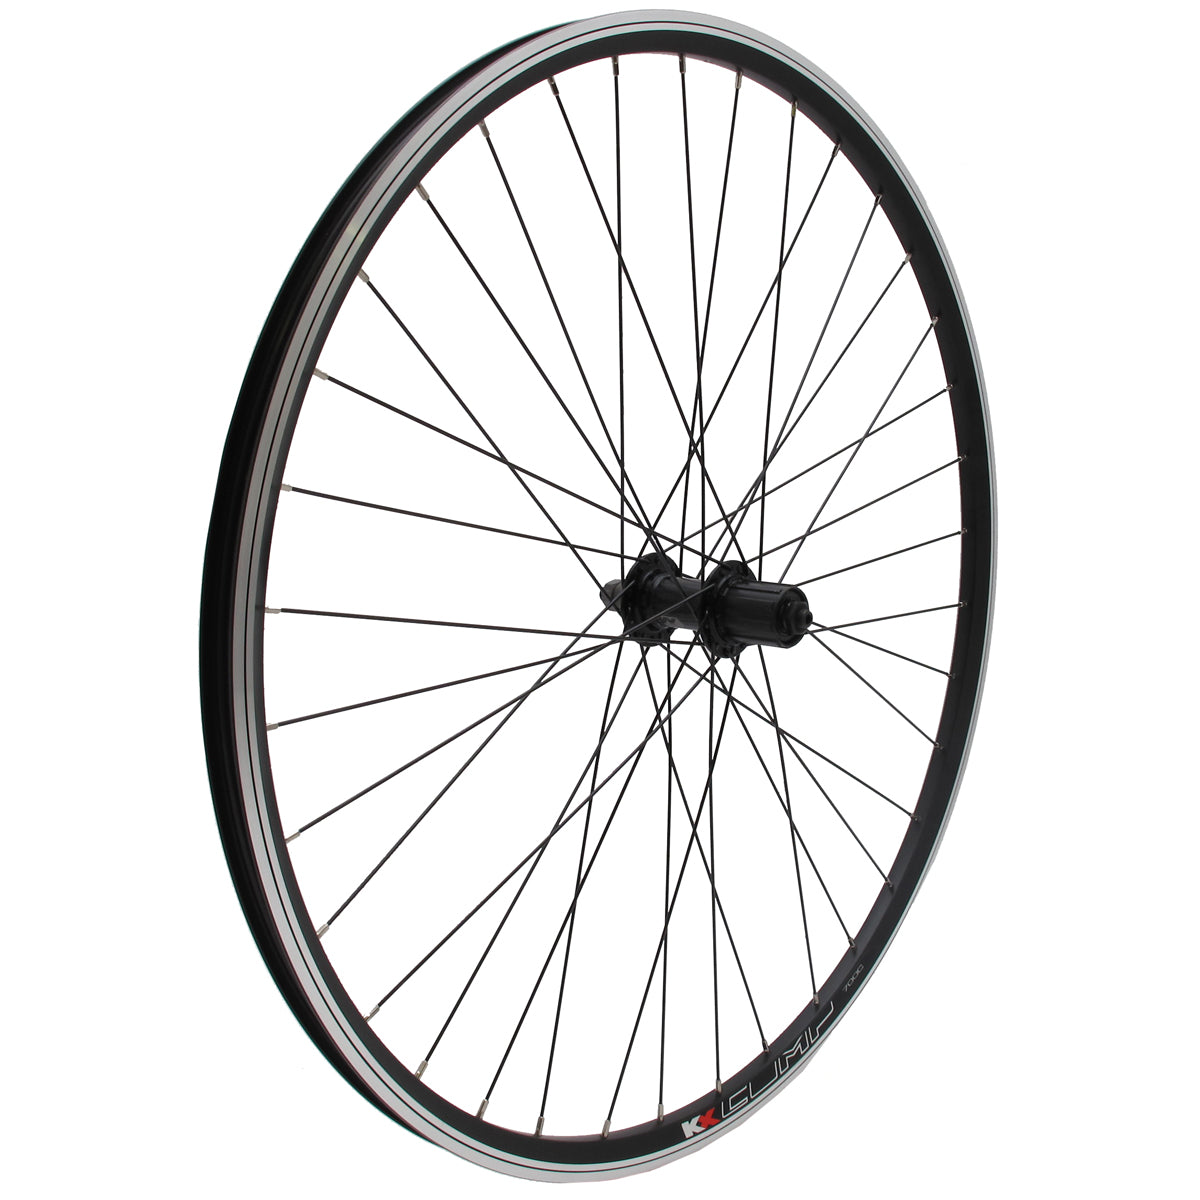 KX 26" Pro MTB Disc / Deore  8-11 Speed MTB Wheelset (check spec for speed compatibility)